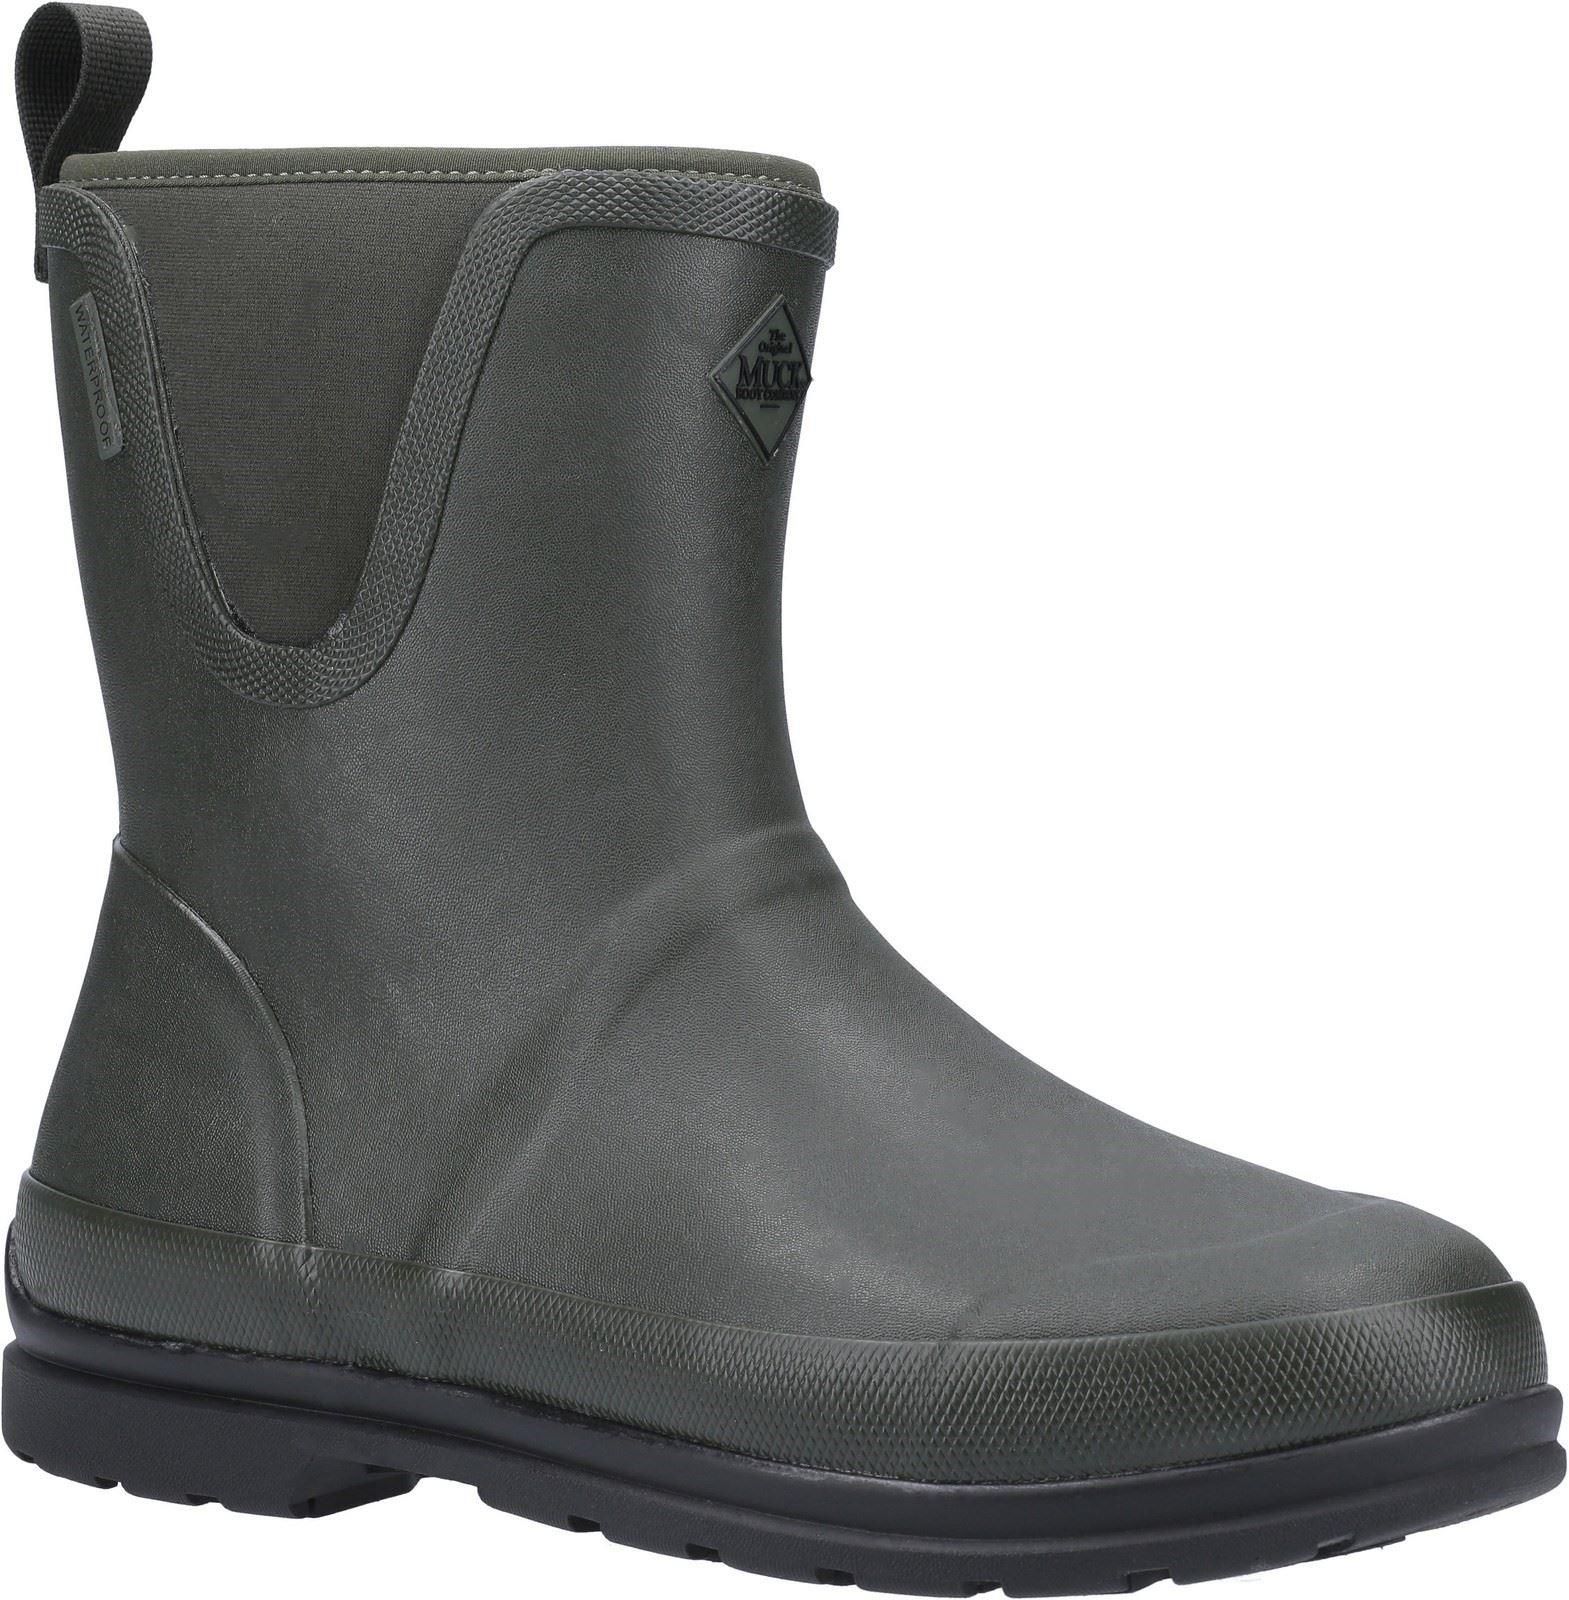 Muck Boots: Originals Pull On Mid Boot -Various Co